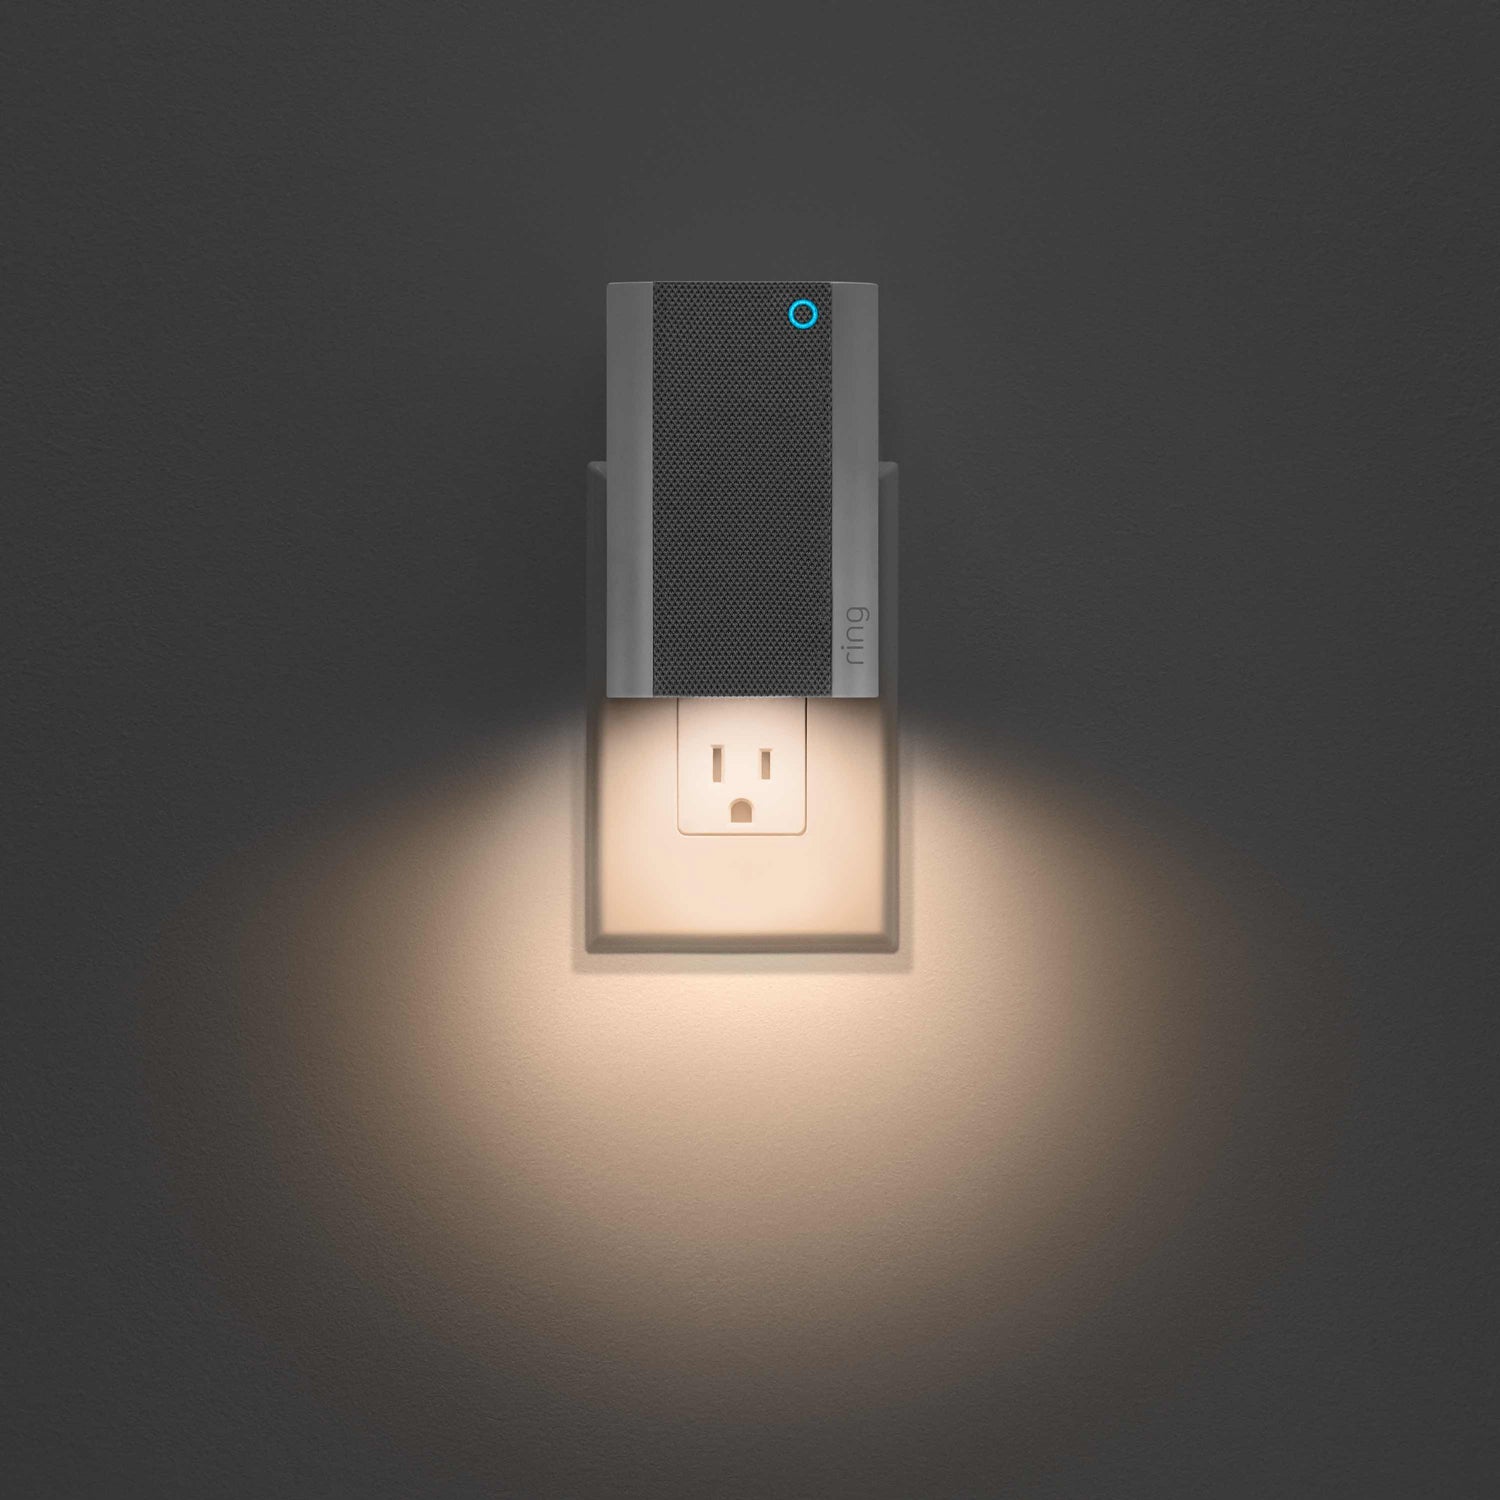 Chime Pro - Chime Pro plugged into an outlet with automatic nightlight shining below.